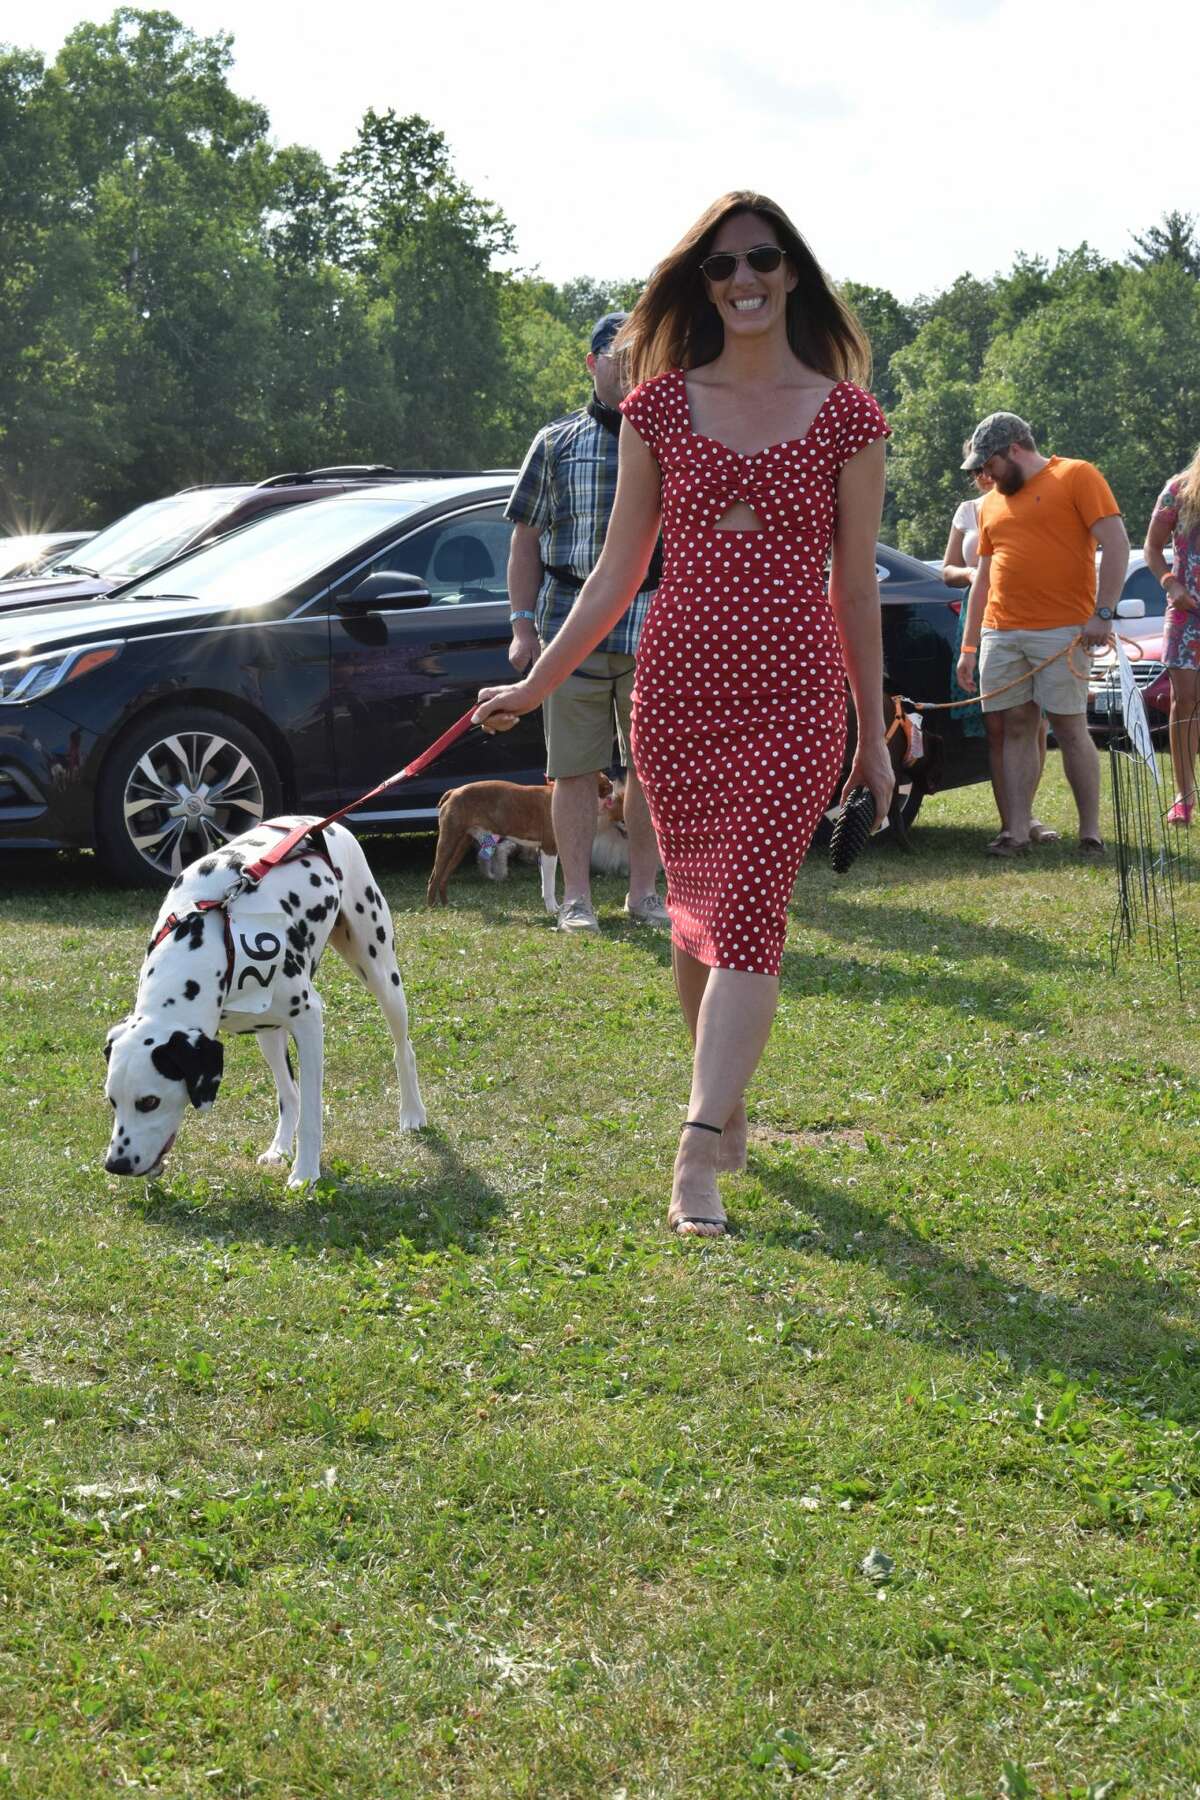 Were you Seen at The AIM Services Dog & Pony Show Cup at Saratoga Polo Association on July 15, 2018?